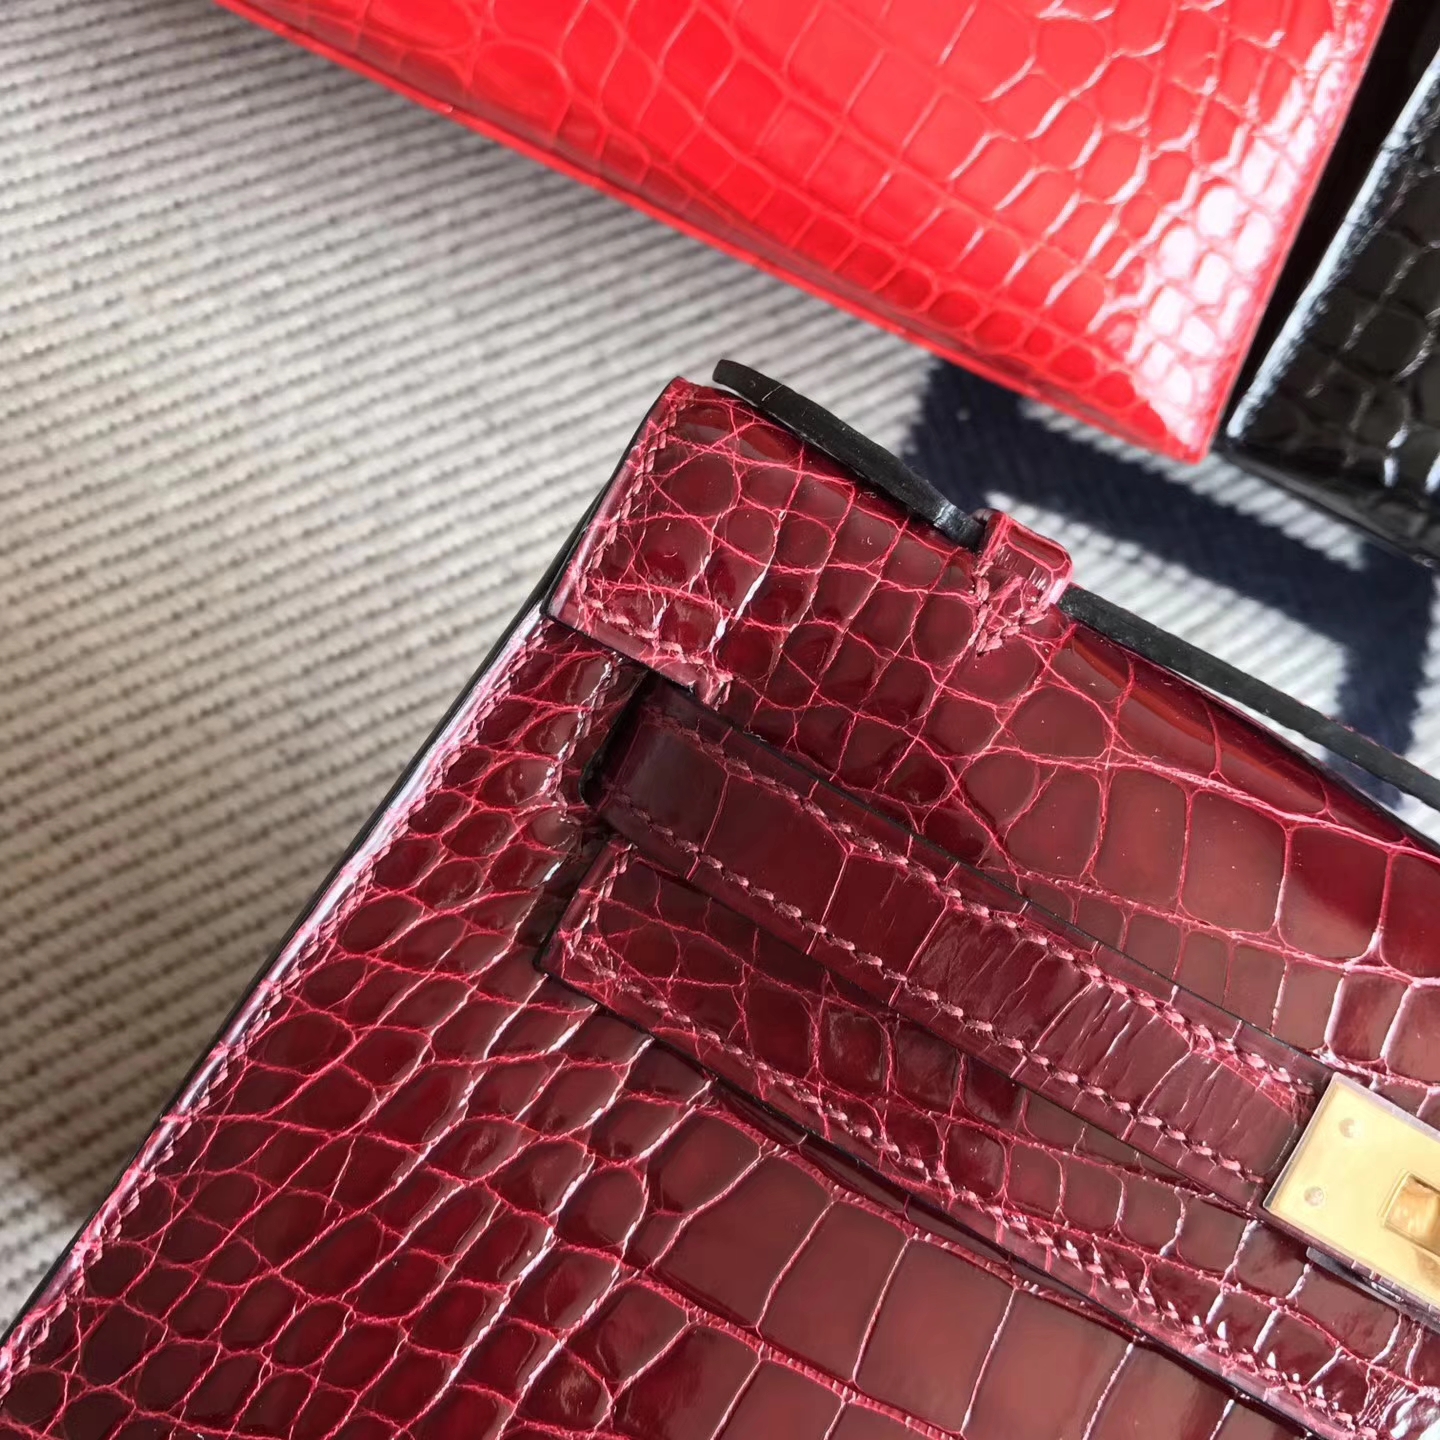 New Hermes Shiny Alligator Crocodile Minikelly22cm Clutch Bag in F5 Bourgogne Red